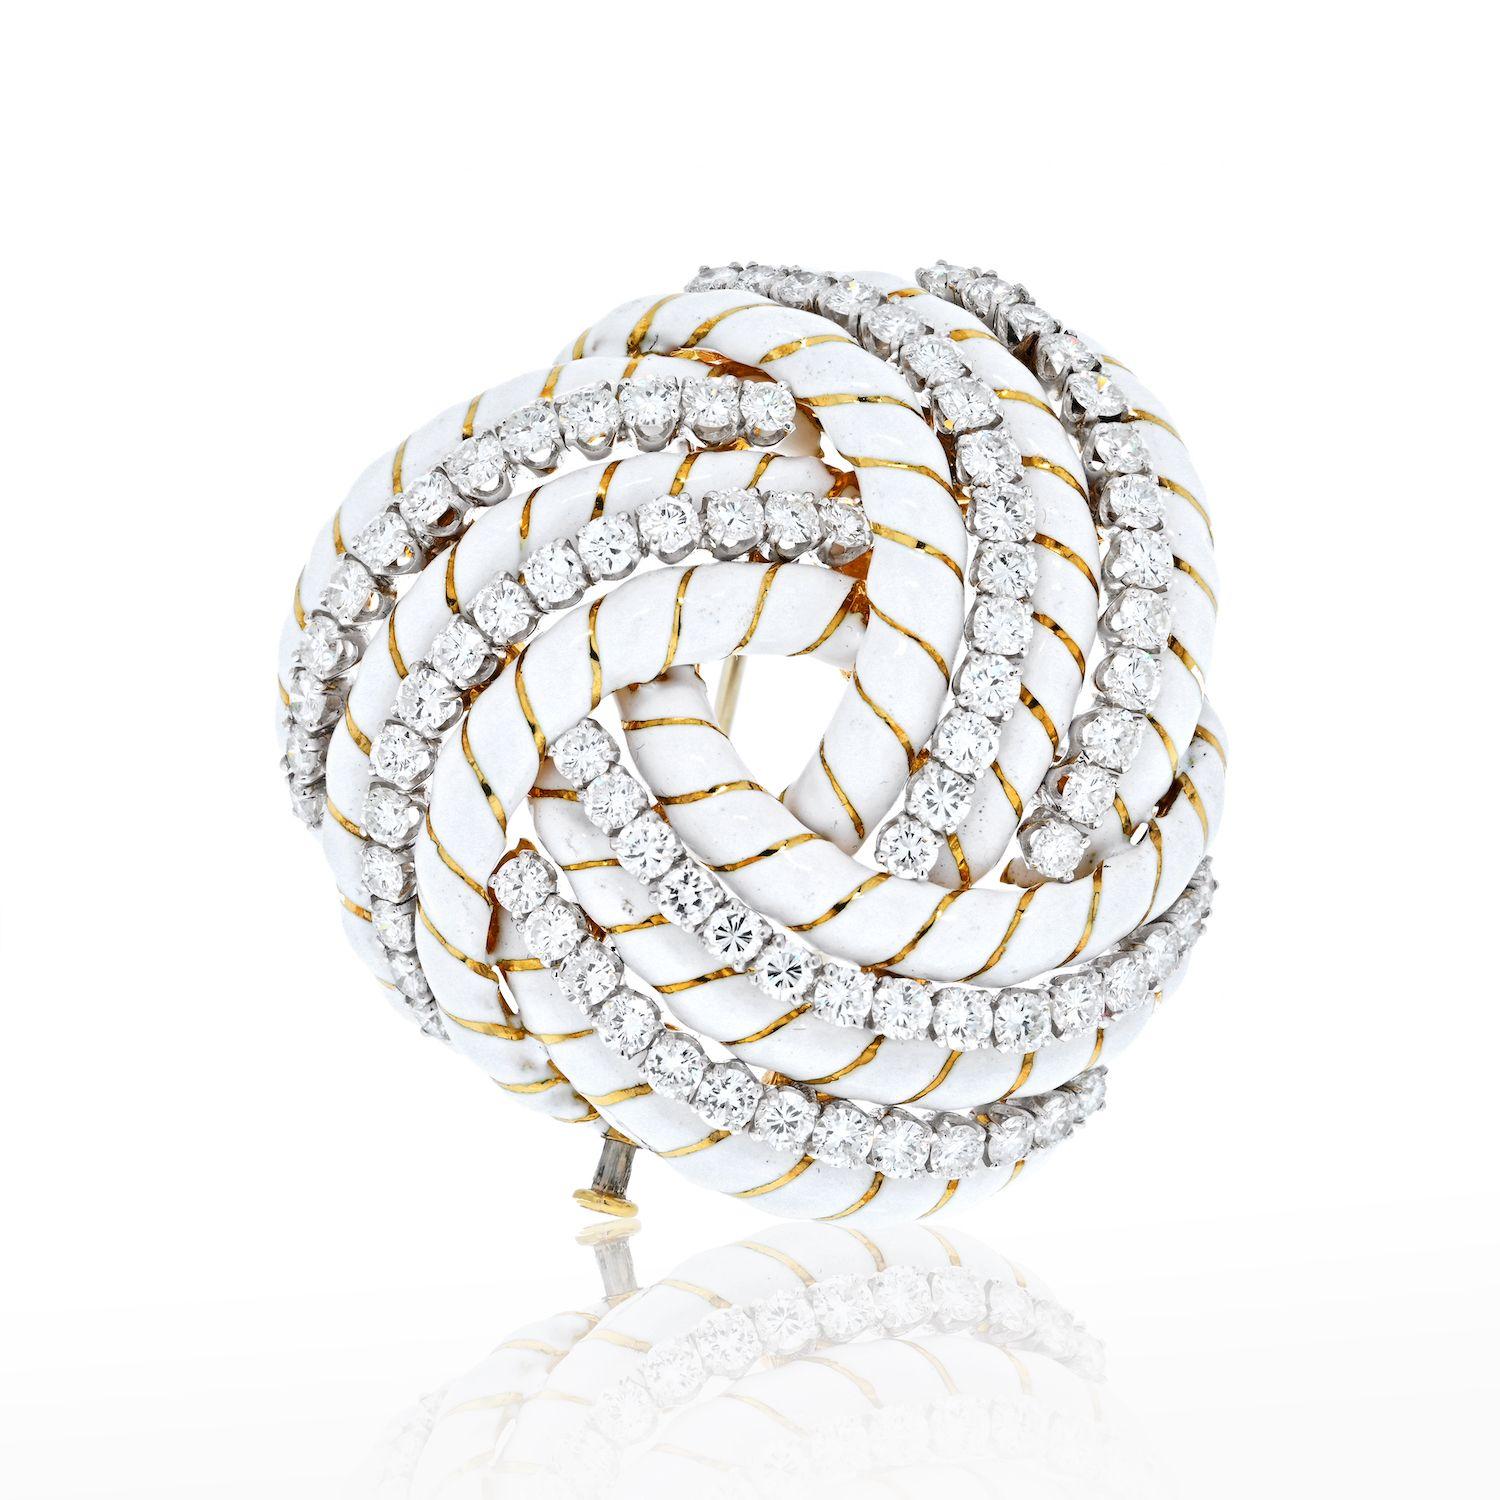 David Webb 18K Yellow Gold White Enamel 8.00cttw Diamond Knot Brooch In Excellent Condition For Sale In New York, NY